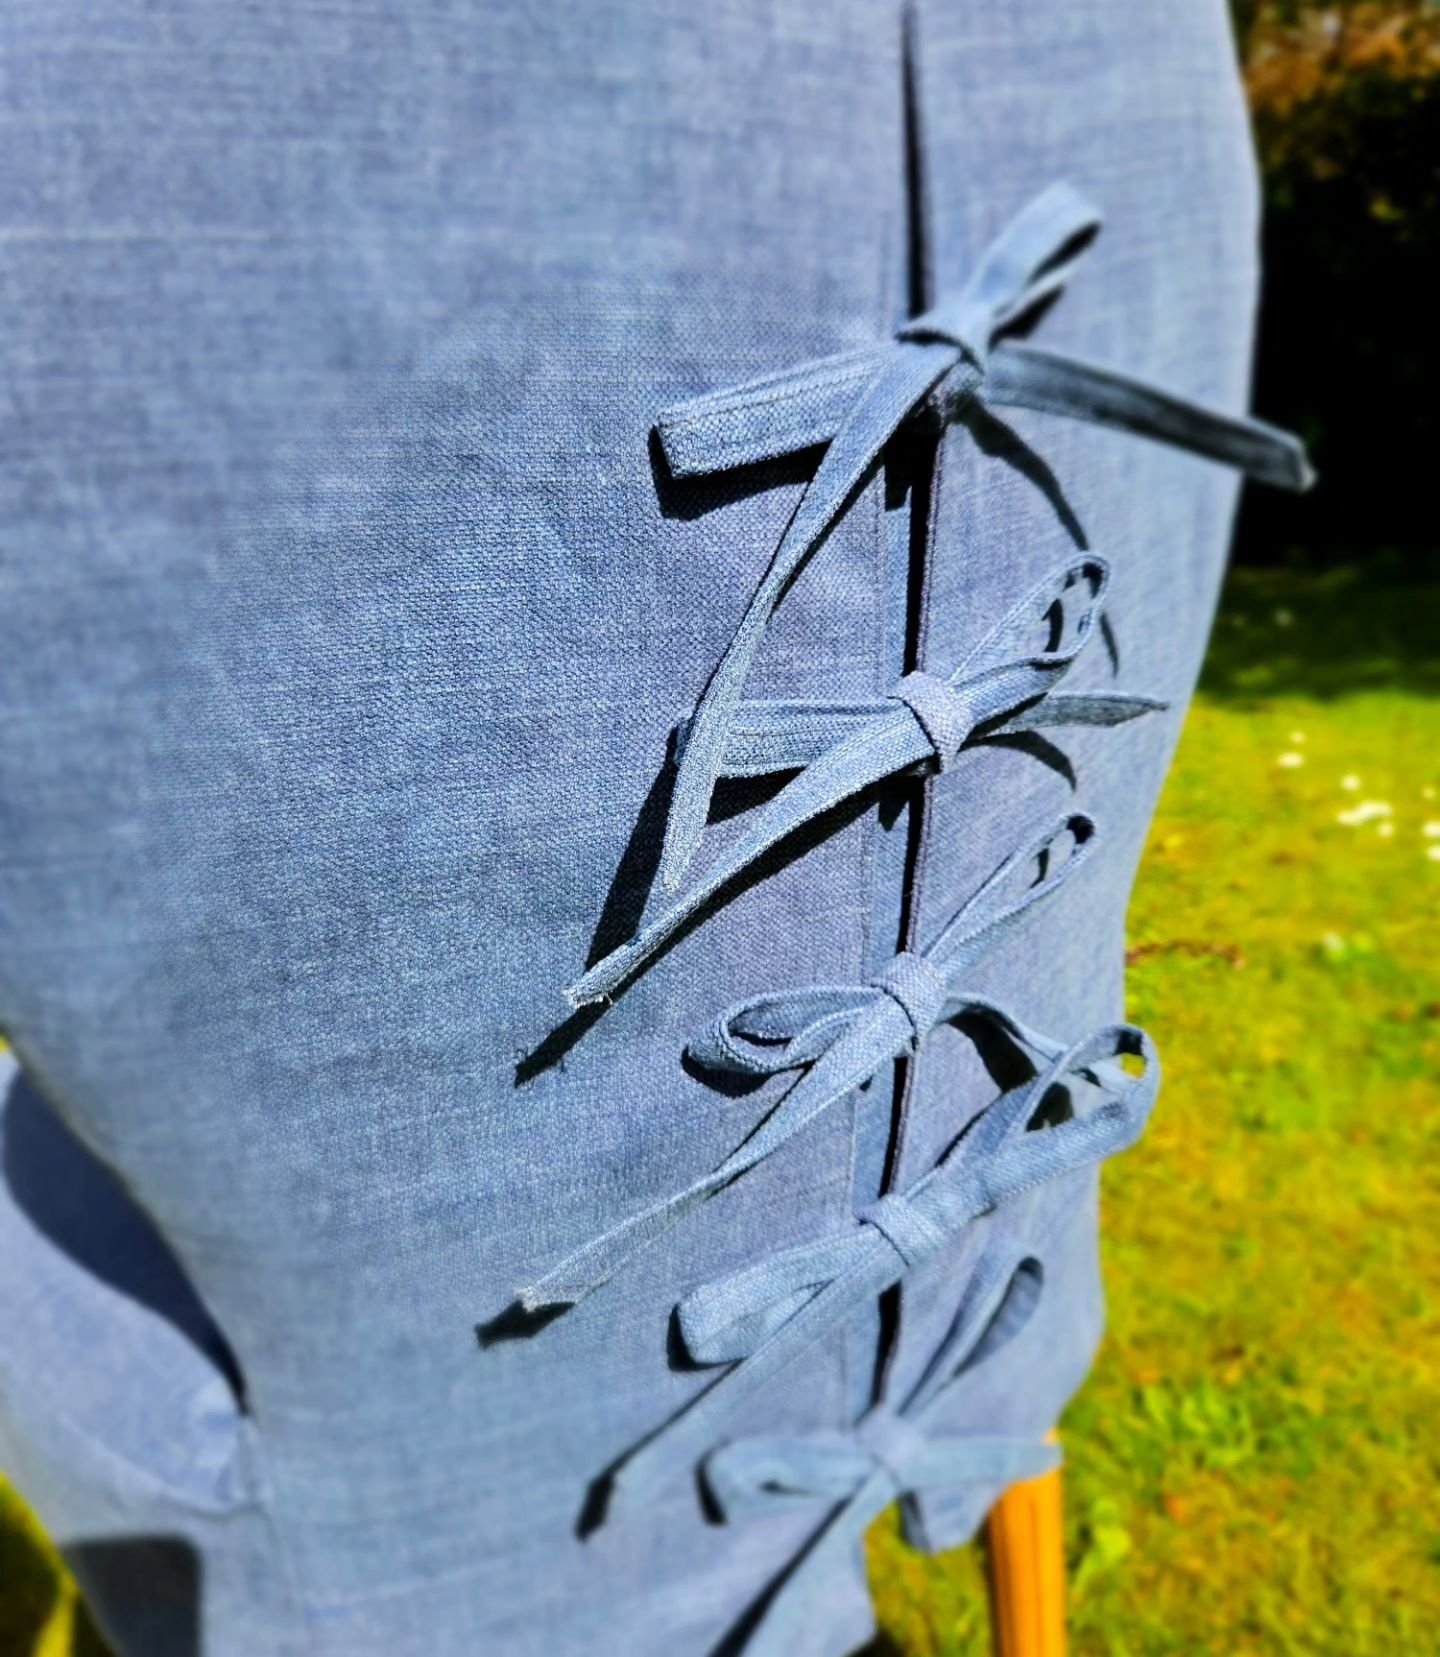 Ties and blue skies 💙

#loosecovers #bowsbowsbows #ties #chairupholstery #upholsterer #countryfurnishings #bankholiday #blueskies #designinspo